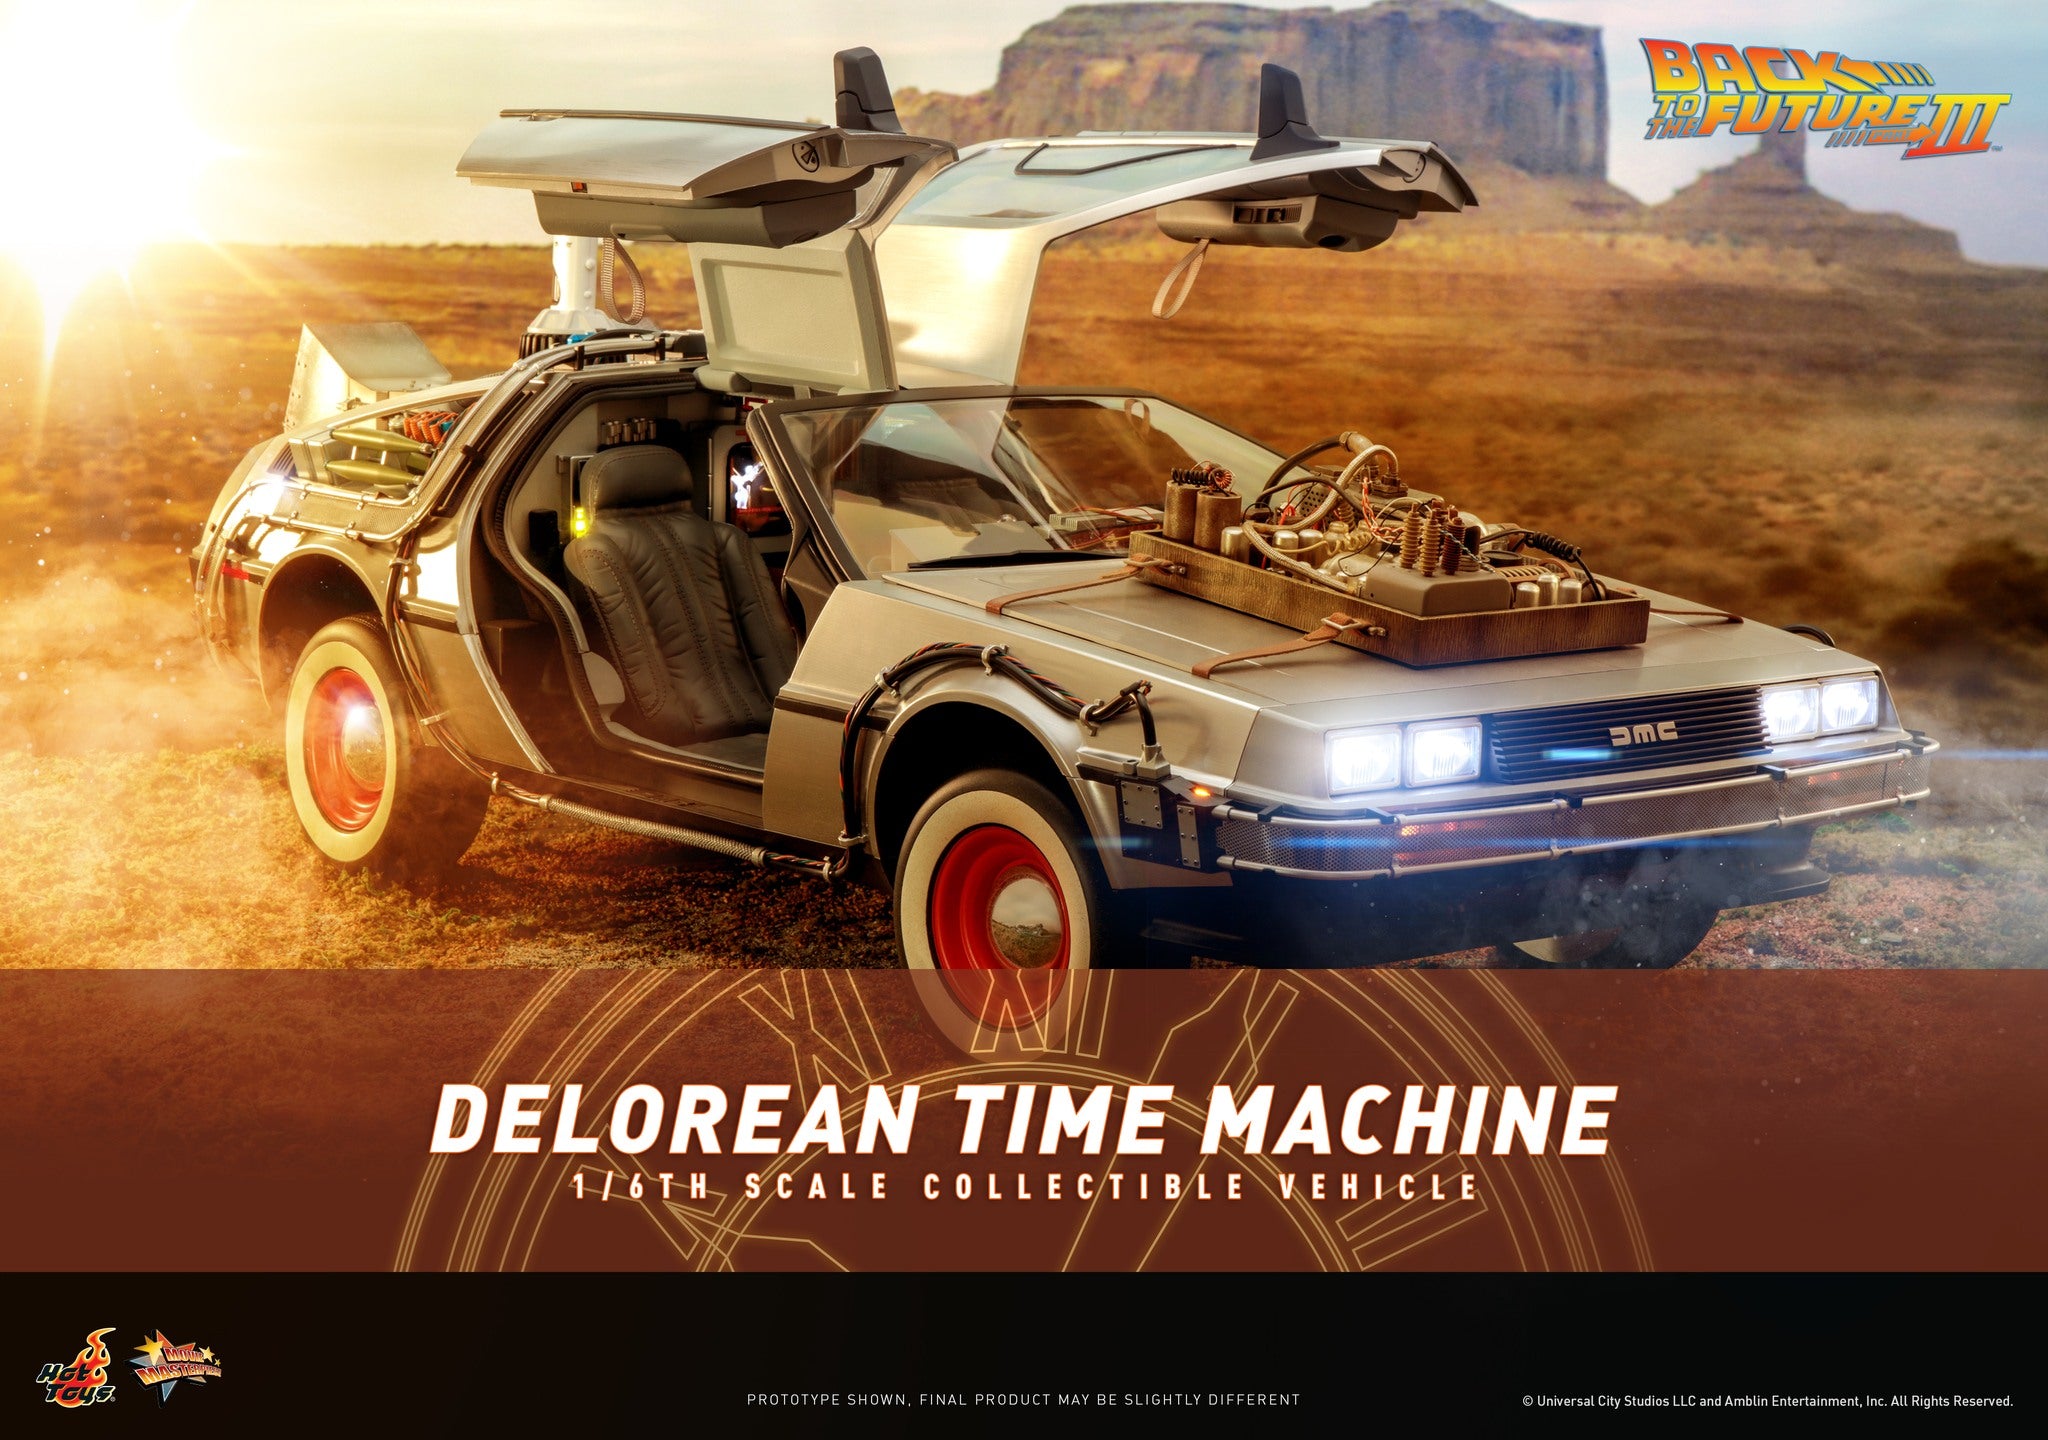 Hot Toys - MMS738 - Back to the Future III - DeLorean Time Machine